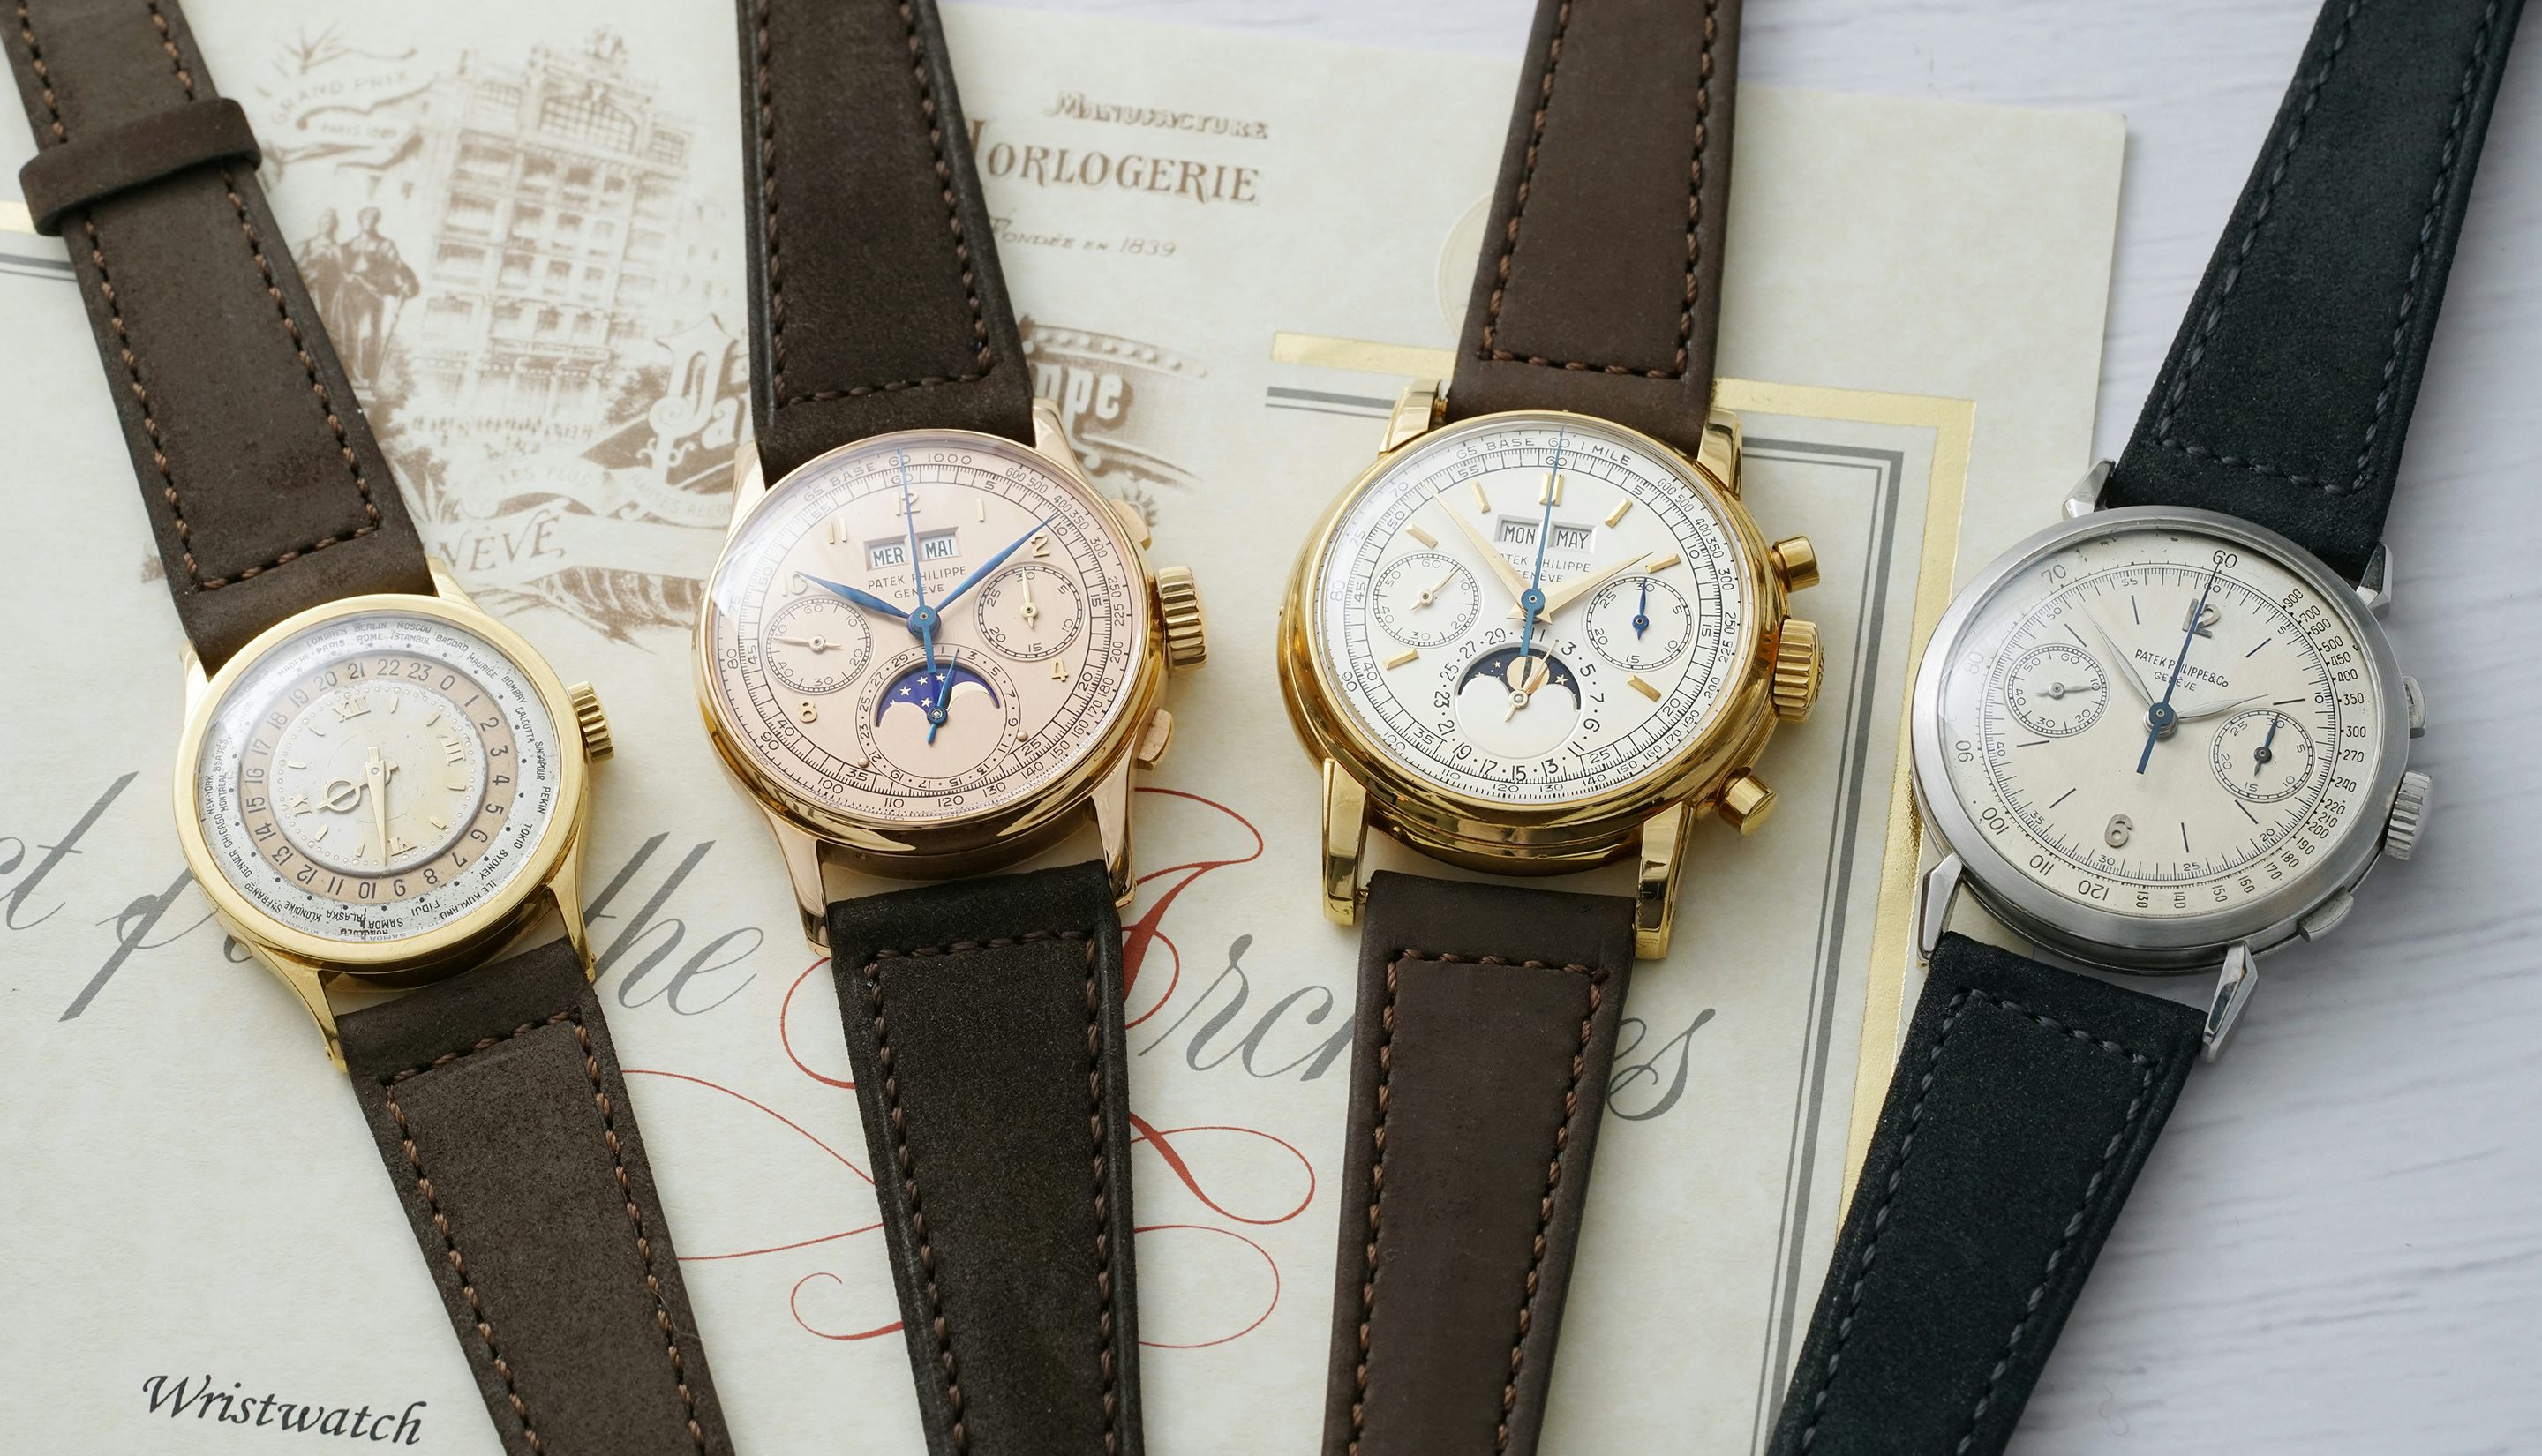 Breaking News: Four Of Jean-Claude Biver's Patek Philippe Watches